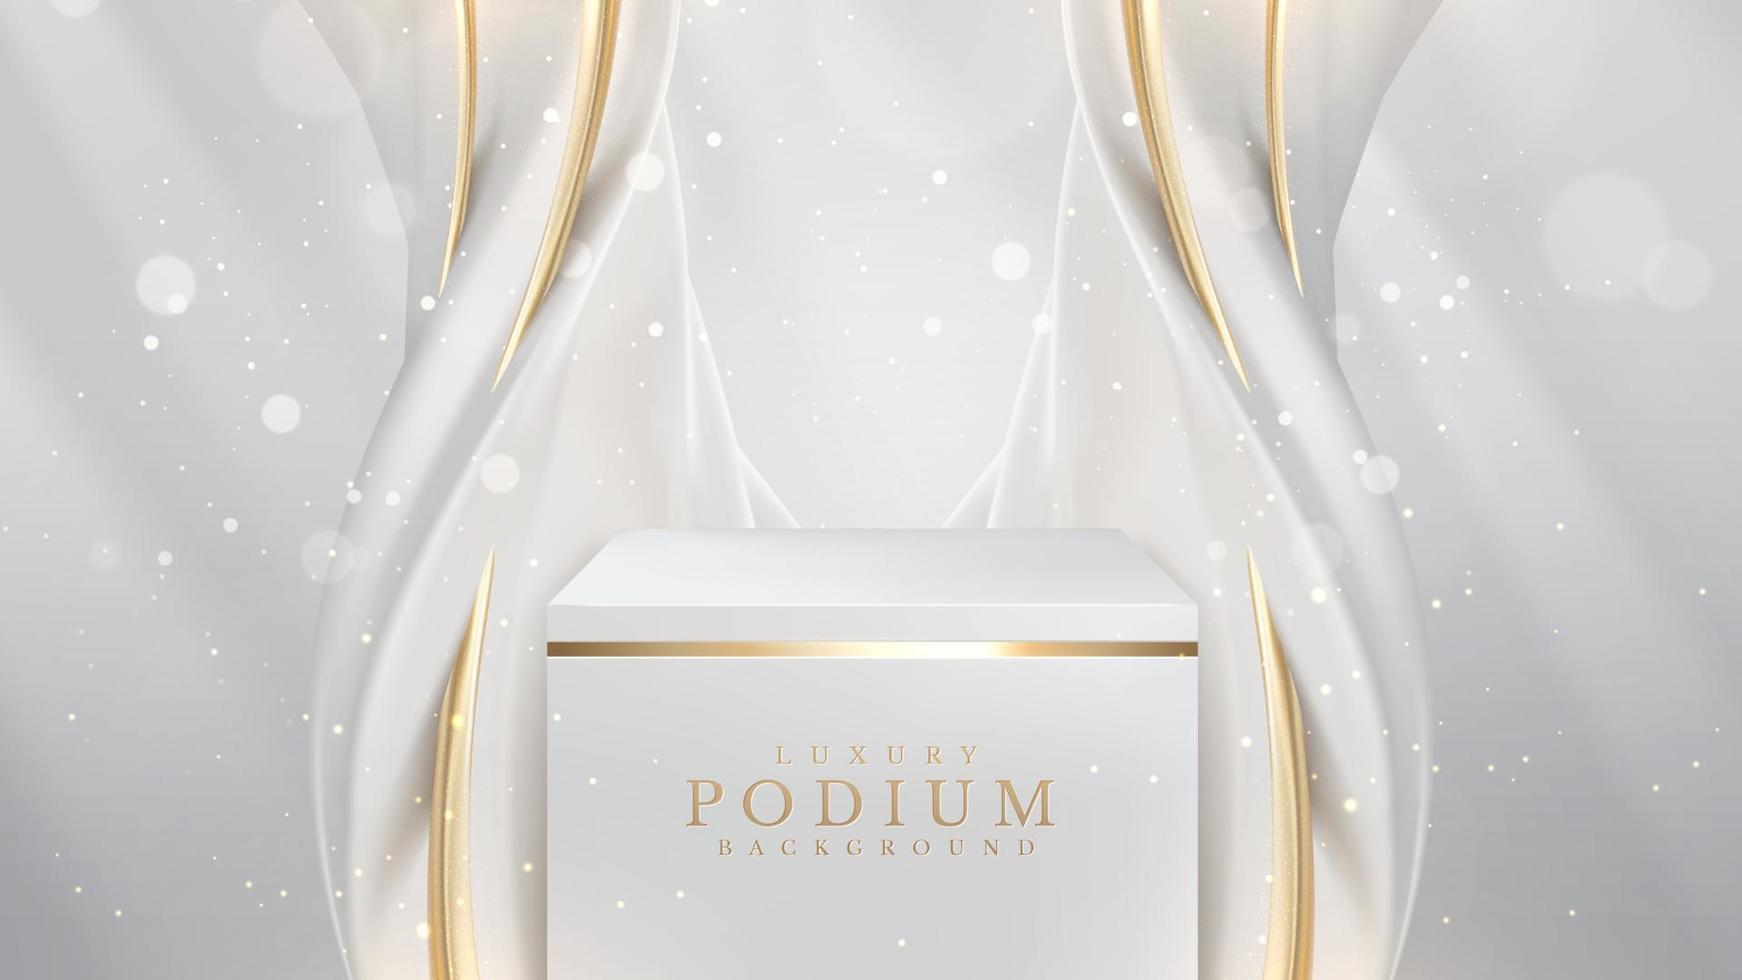 Product display podium with white liquid element with golden curve lines decoration and glitter light effect. Realistic luxury style design. Vector illustration.